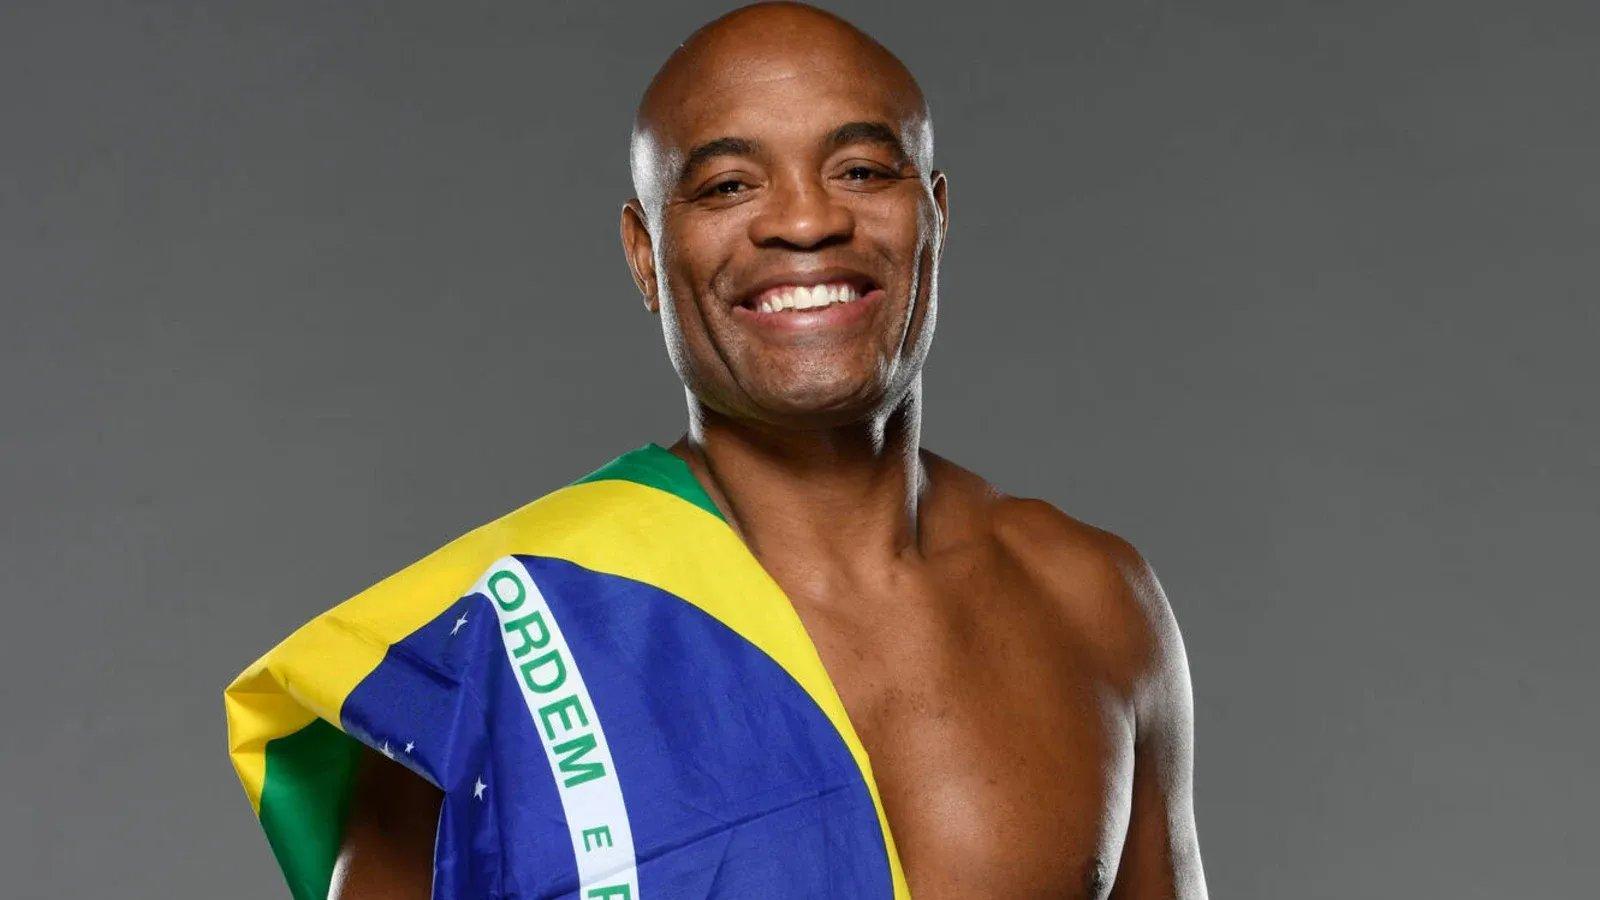 Anderson Silva smiles with the Brazilian flag. Credit: Mike Roach - Zuffa LLC via Getty Images.